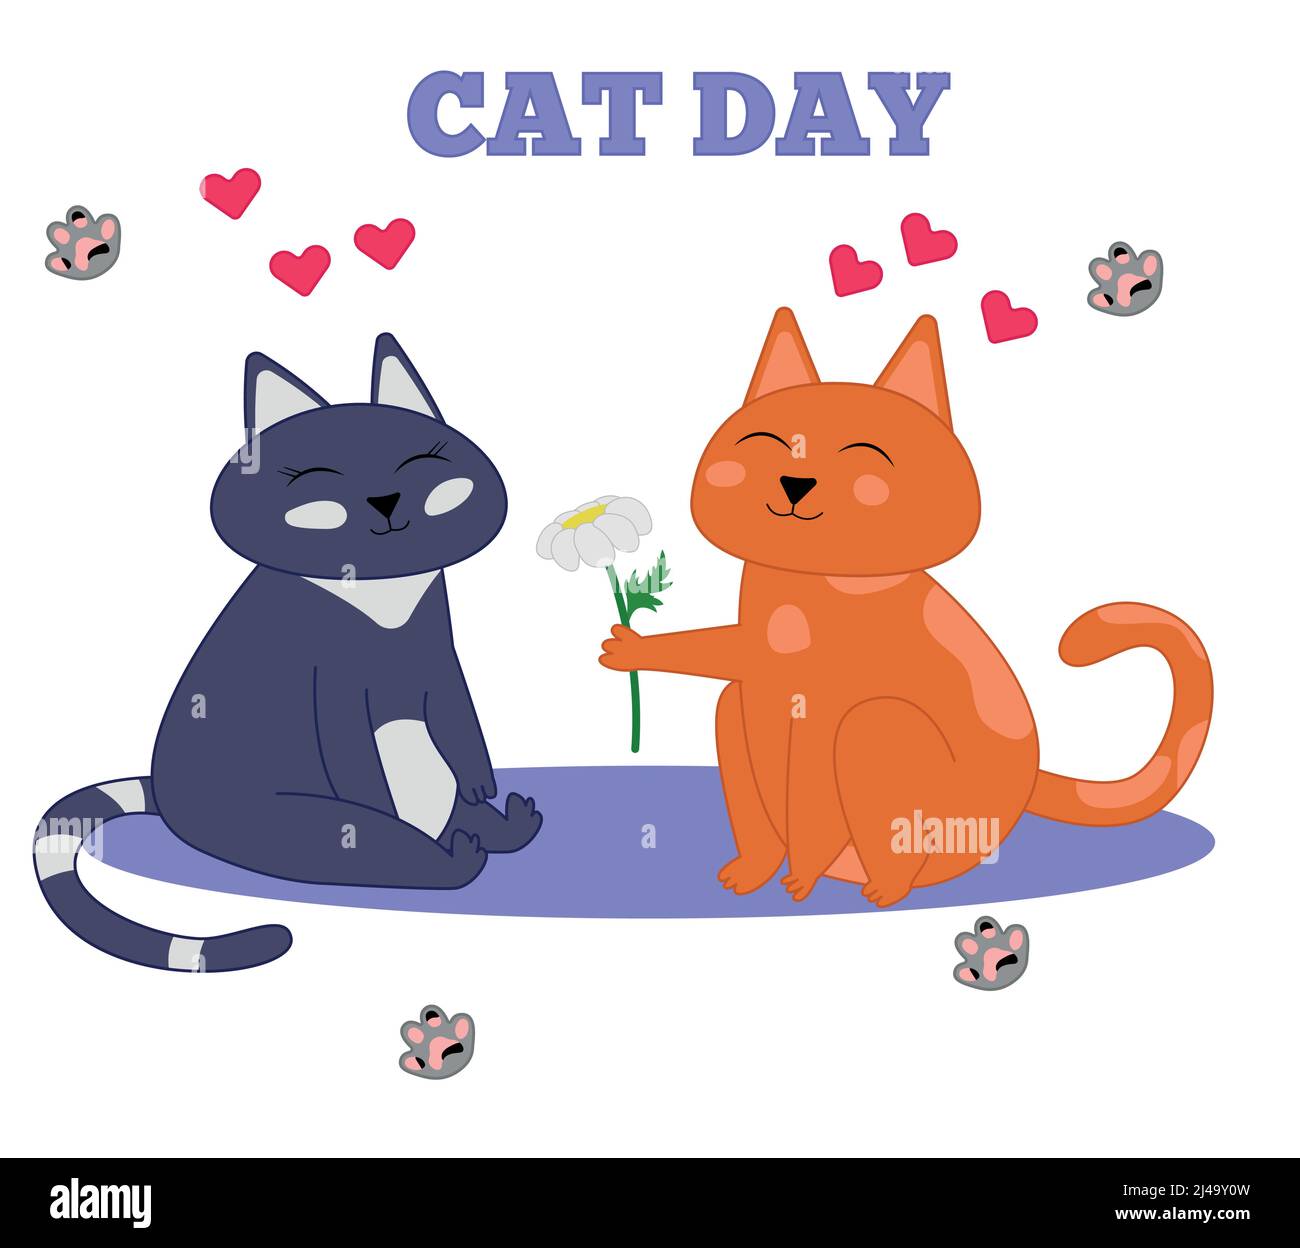 Premium Vector, Cat lover lettering illustration, cute happy cats sitting  together with pink loving hearts, pets on romantic dating